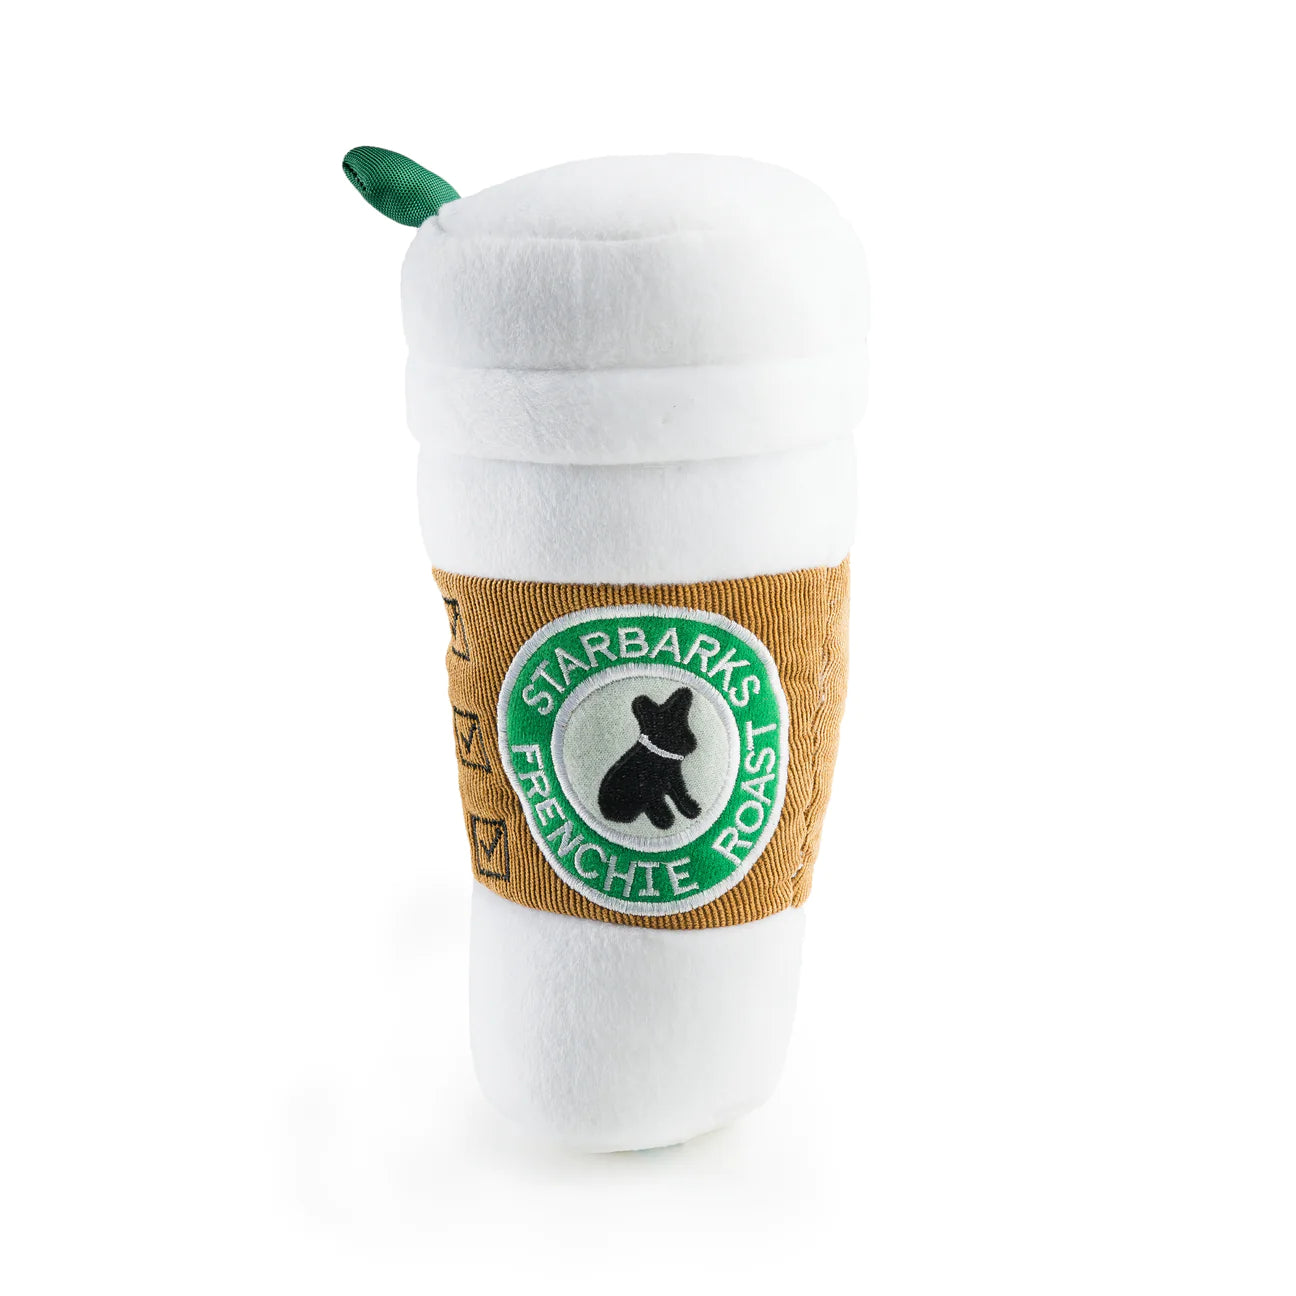 Starbarks Coffee Cup - Dog Toy